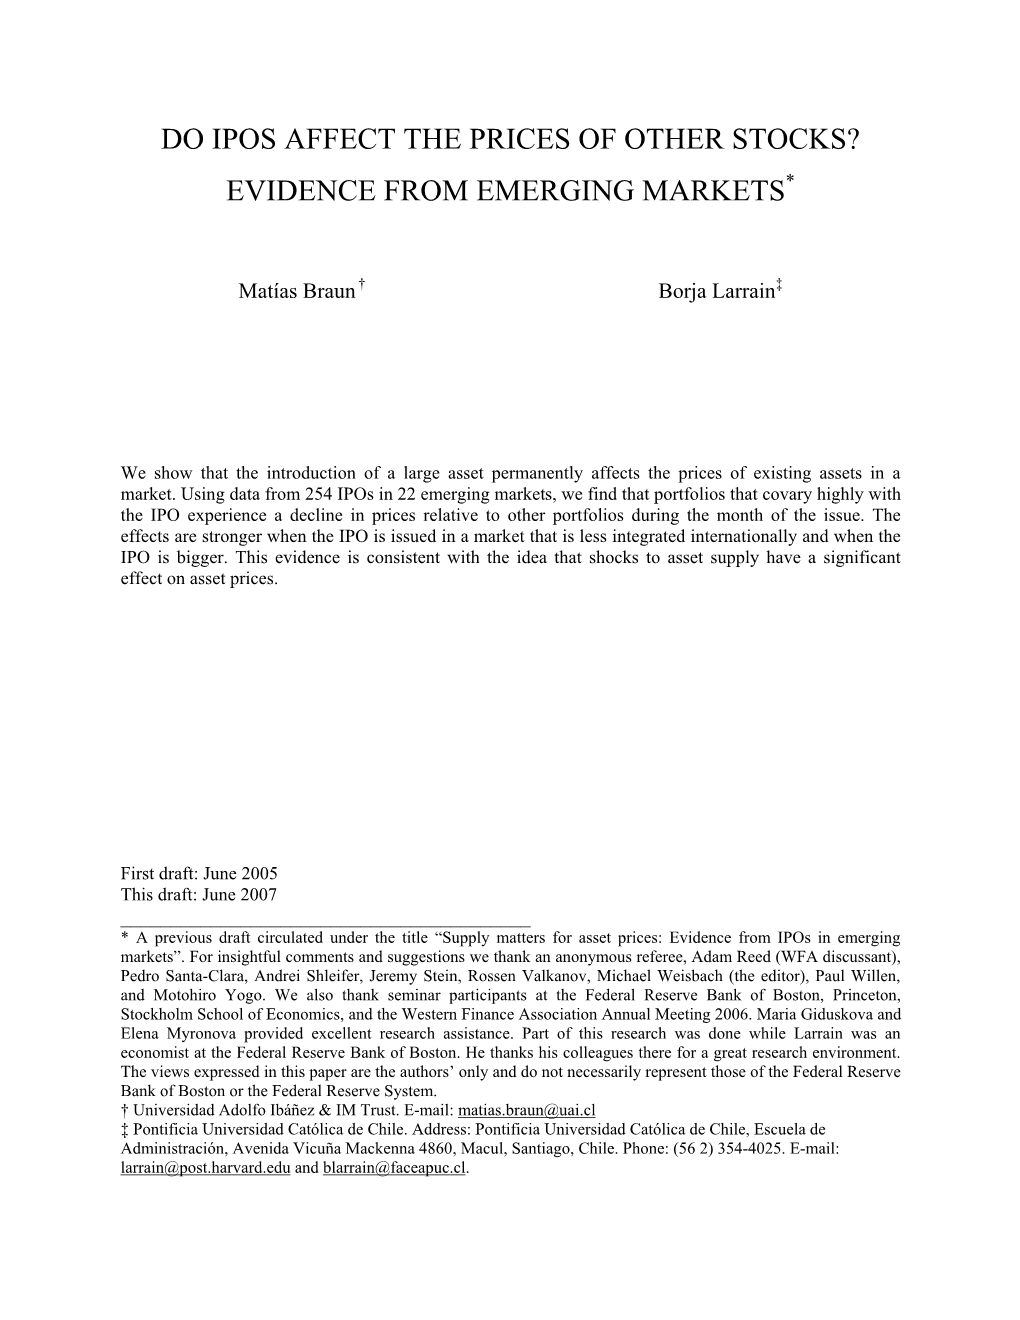 Do Ipos Affect the Prices of Other Stocks? Evidence from Emerging Markets*